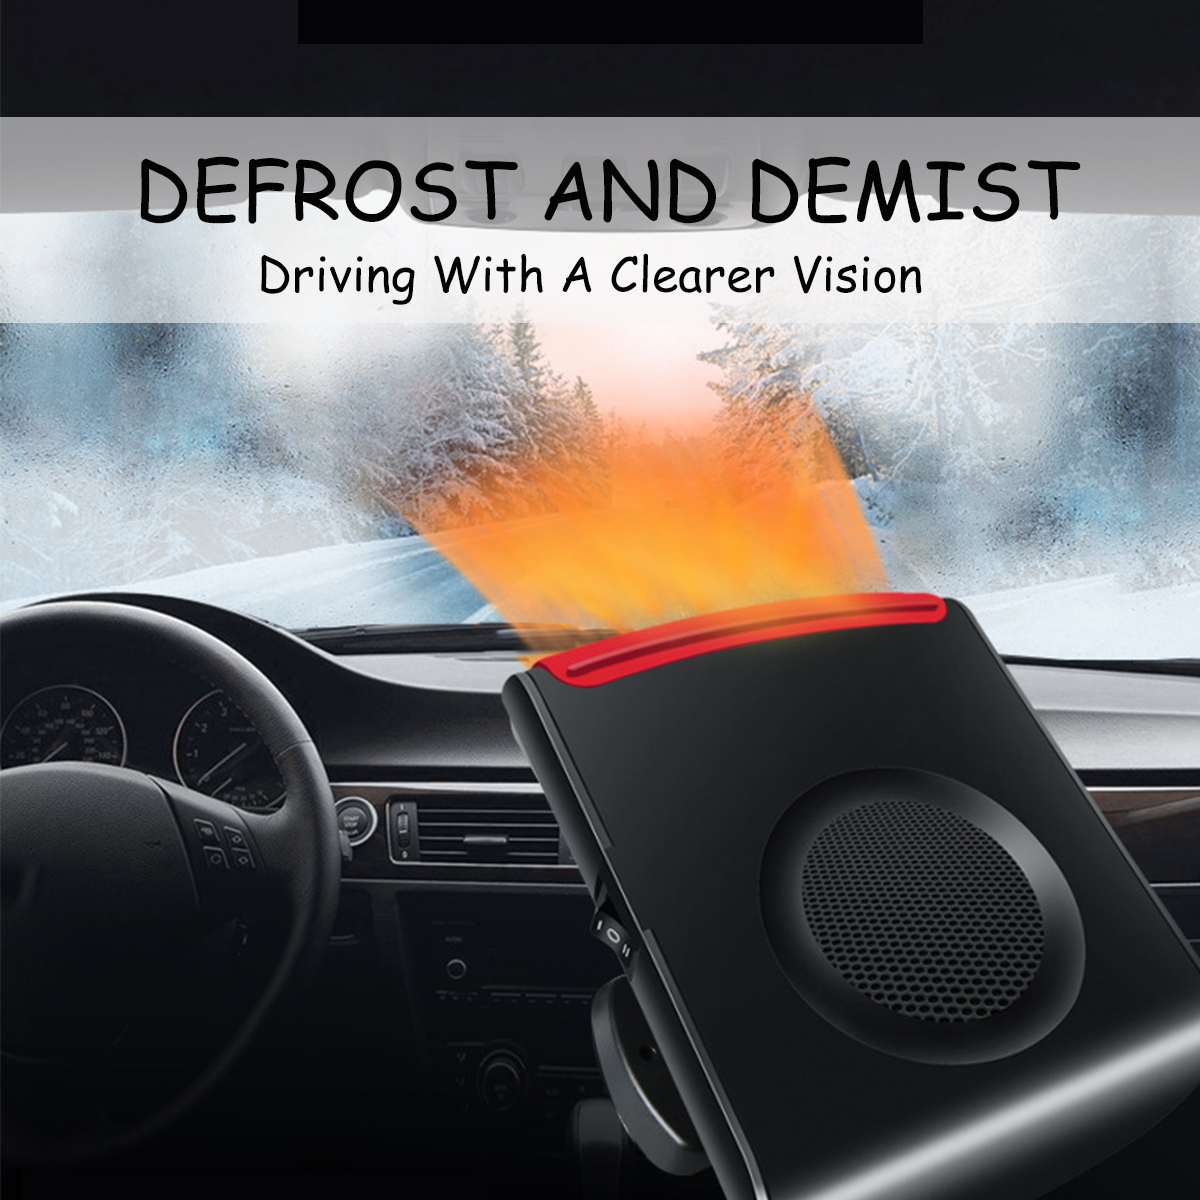 500W 12V Car Heater Electric Heater Heating Cooling Fan Portable Dryer Windshield Demister Defroster Auto Electric Heater